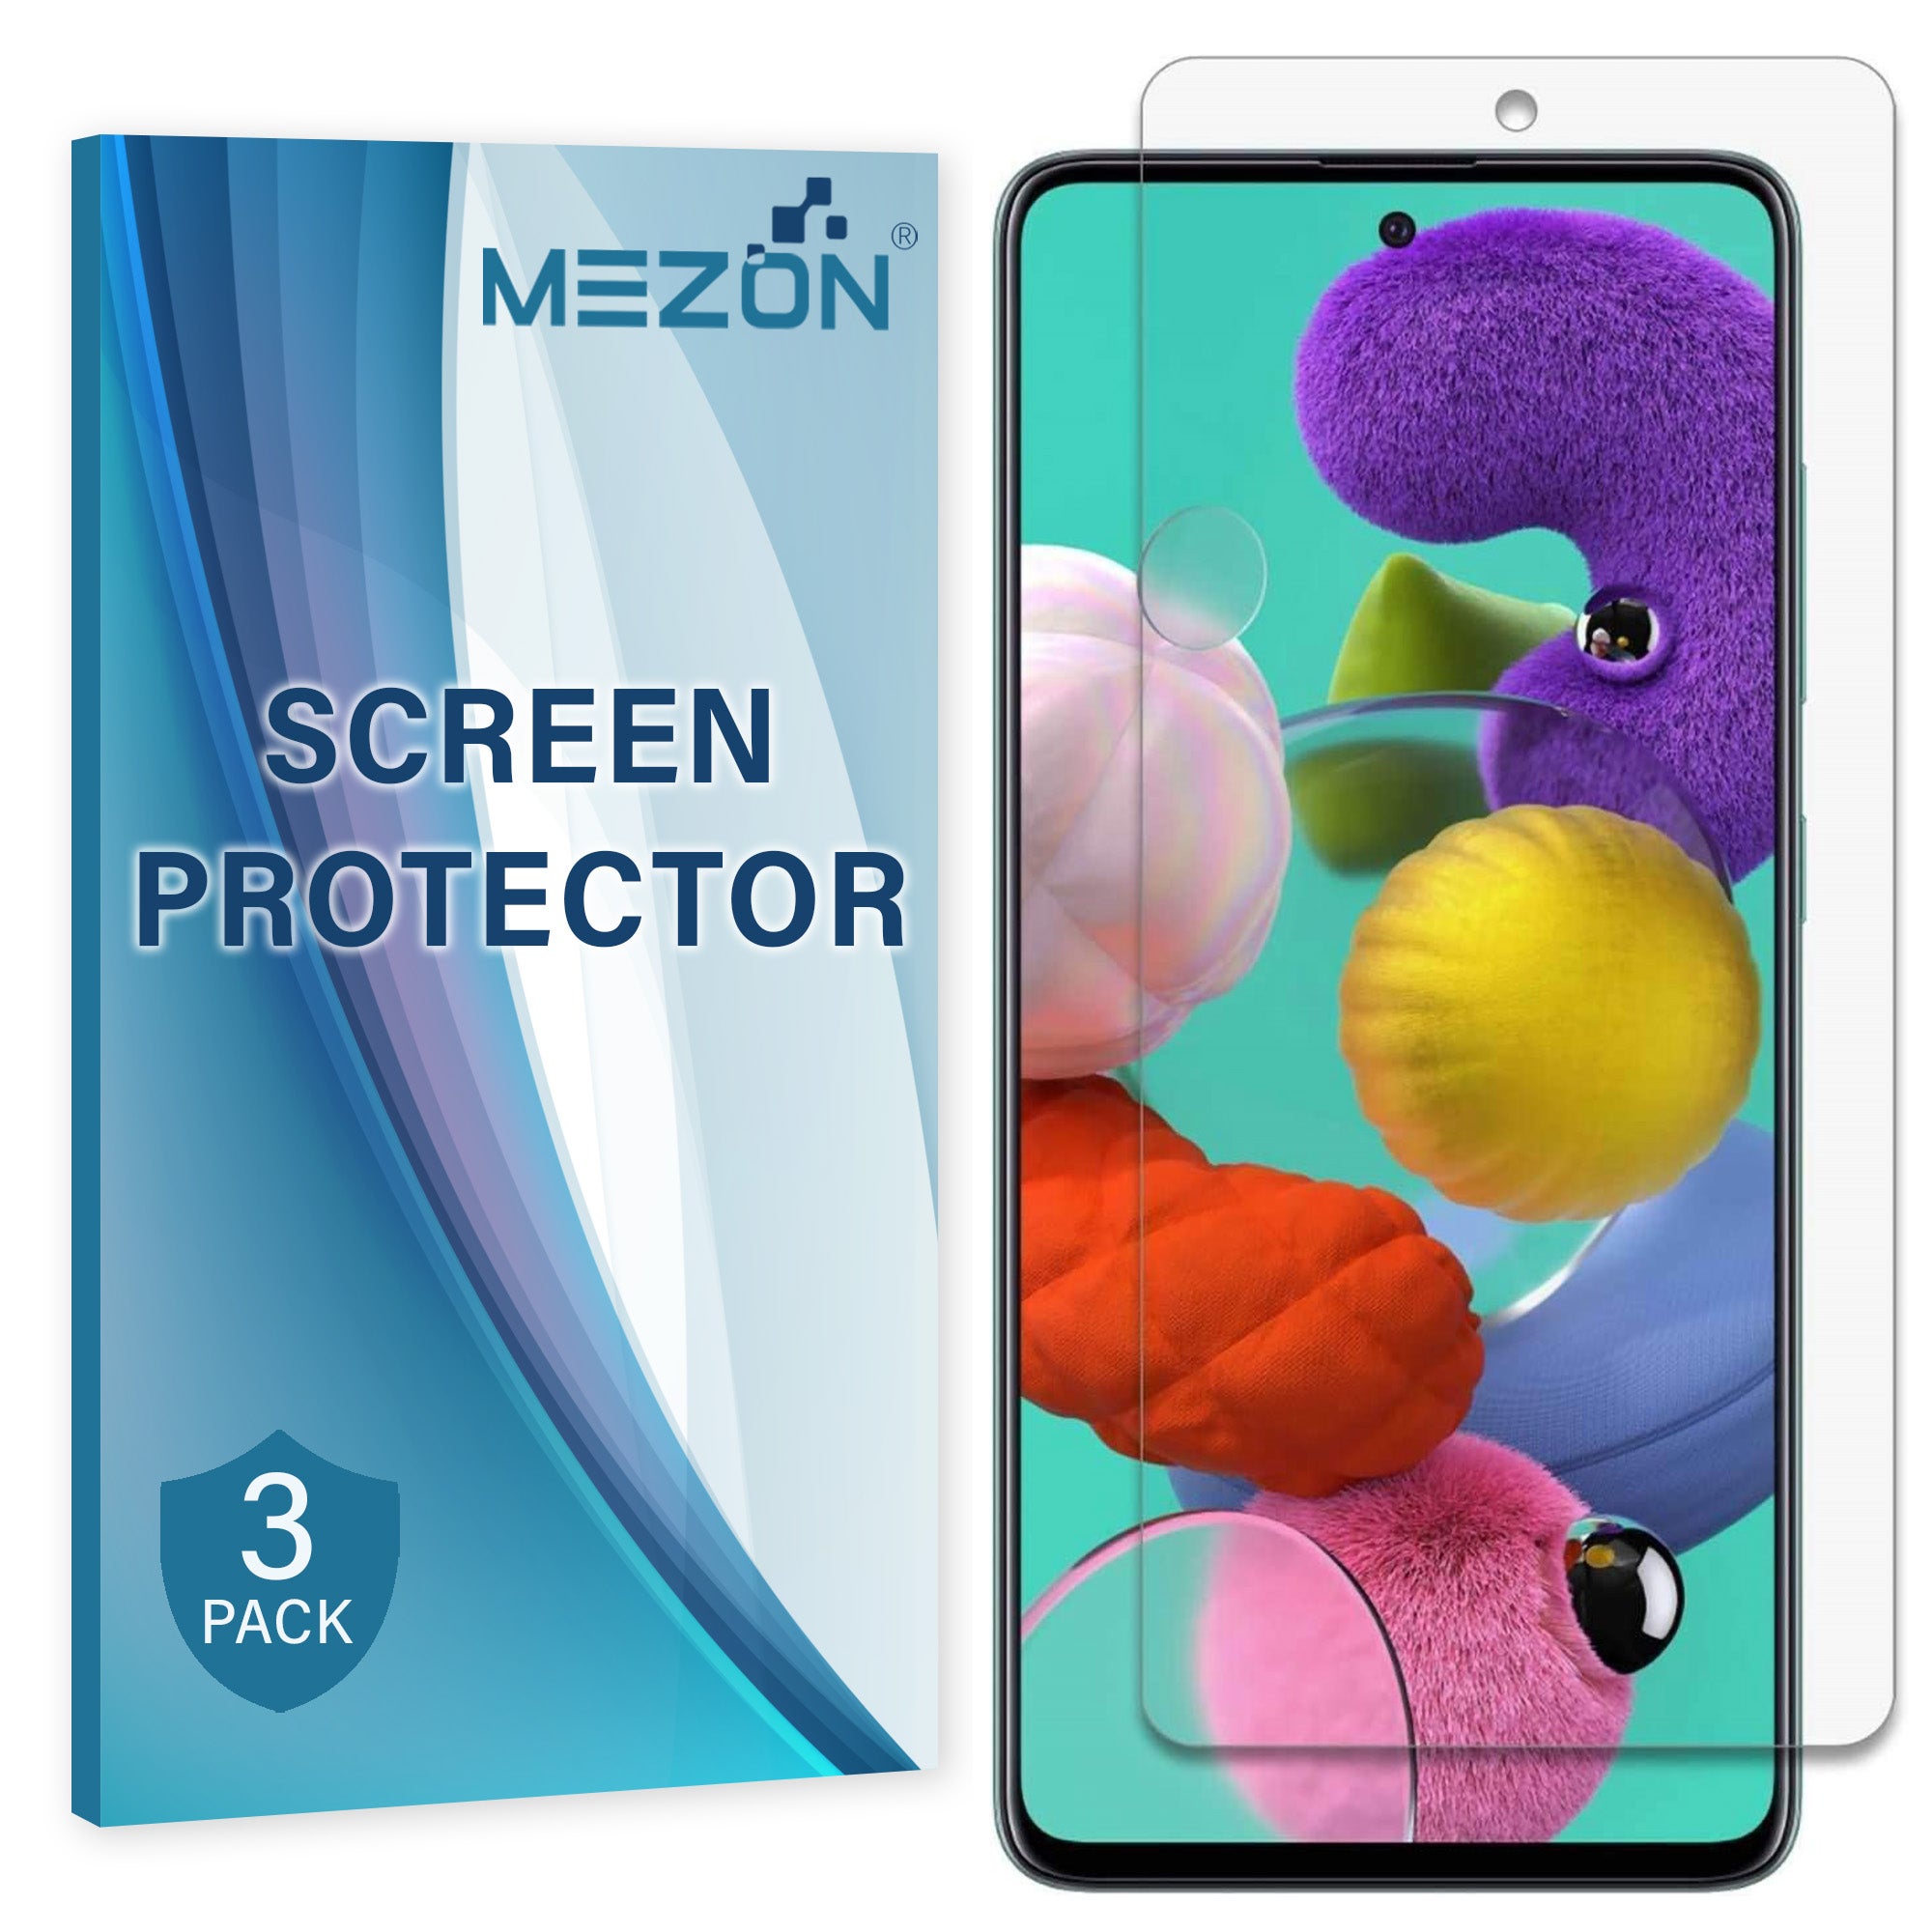 [3 Pack] Samsung Galaxy A51 Ultra Clear Screen Protector Film by MEZON – Case Friendly, Shock Absorption (A51, Clear)